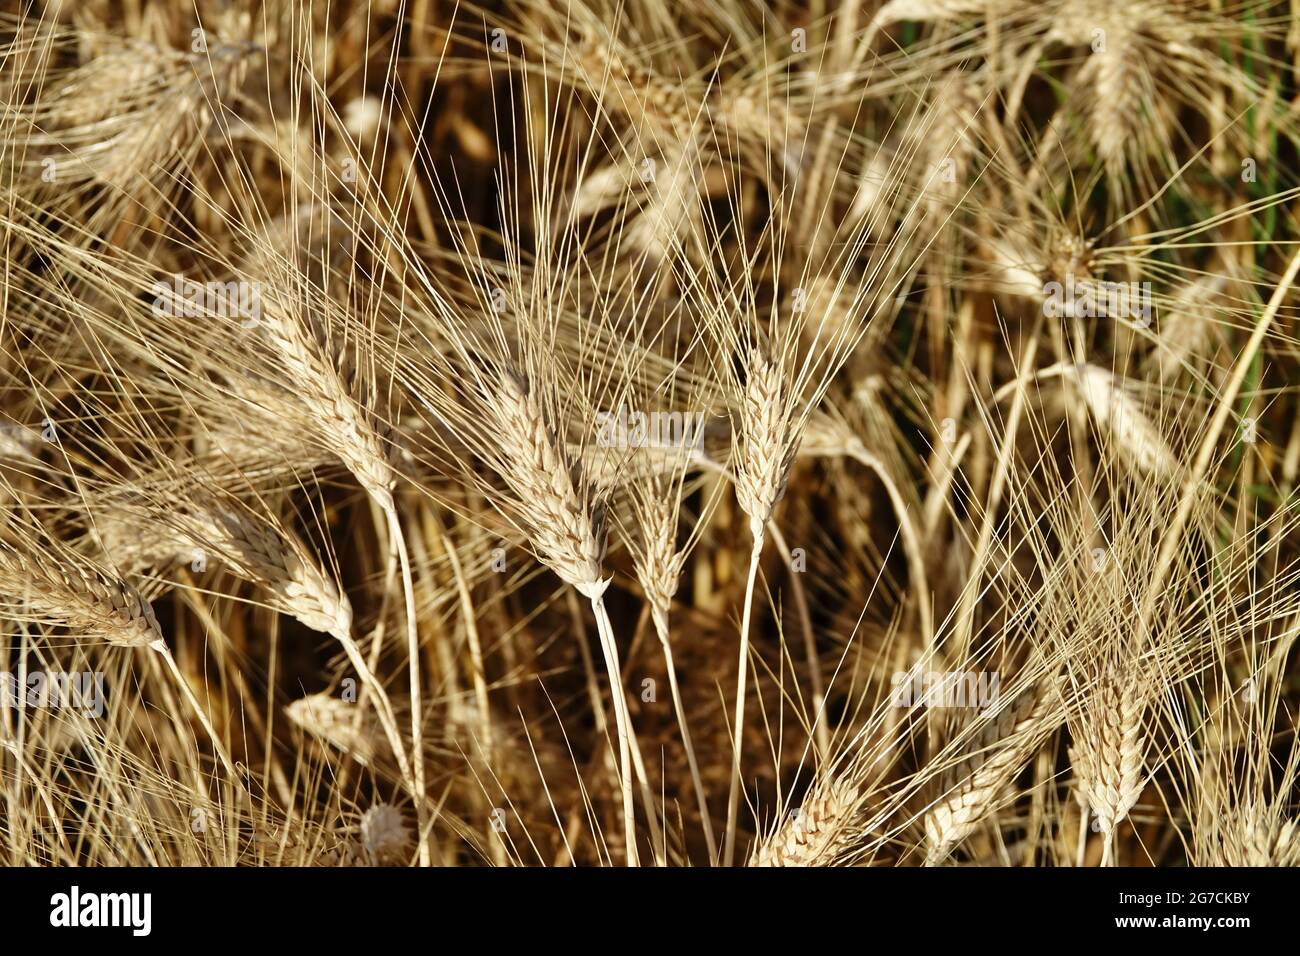 close up of a ripe ears of organic wheat in a field ready to be harvested Stock Photo